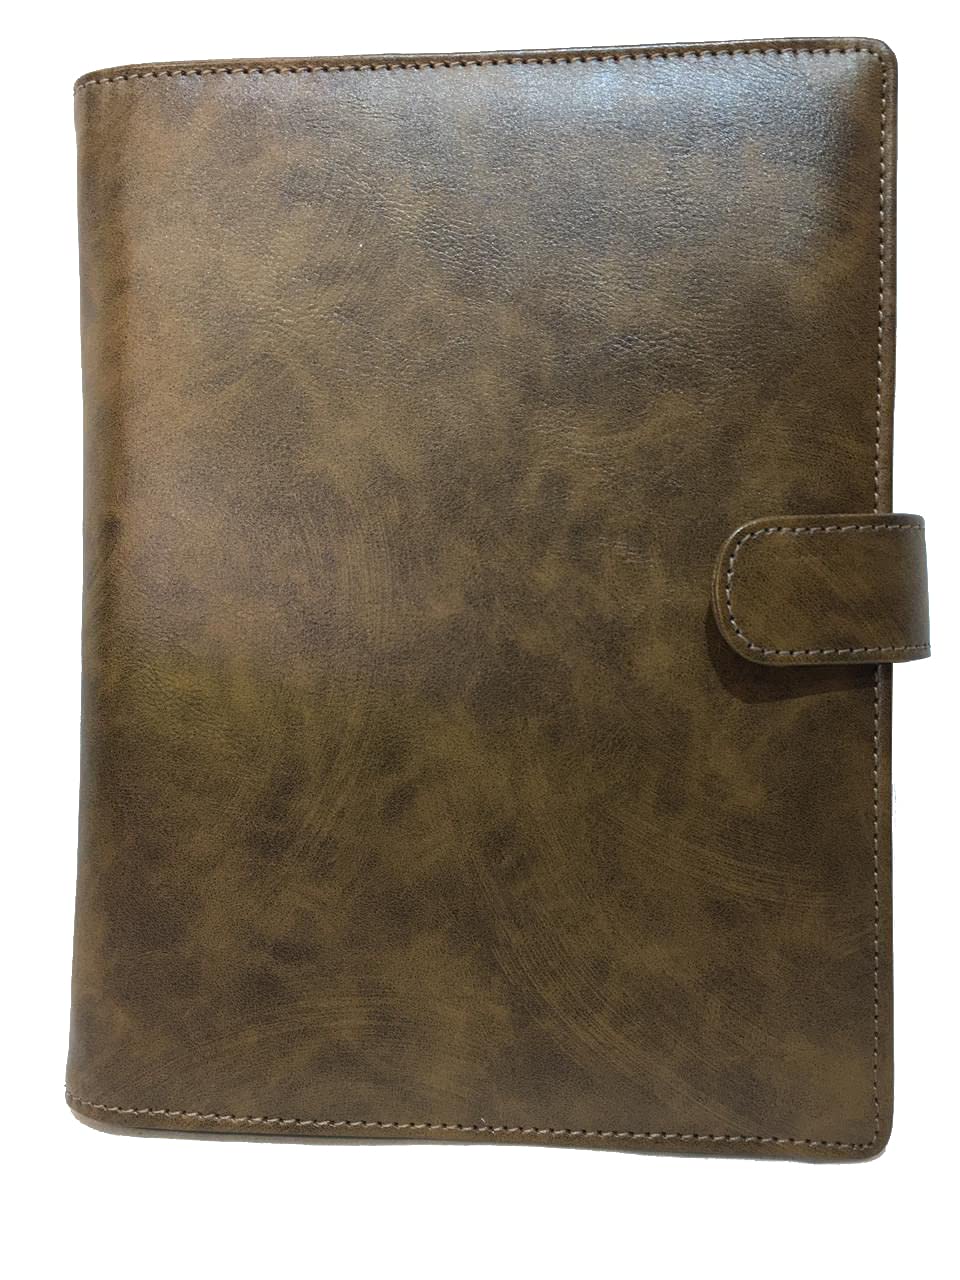 Handmade Vegan Leather Journal Writing Notebook with Lined